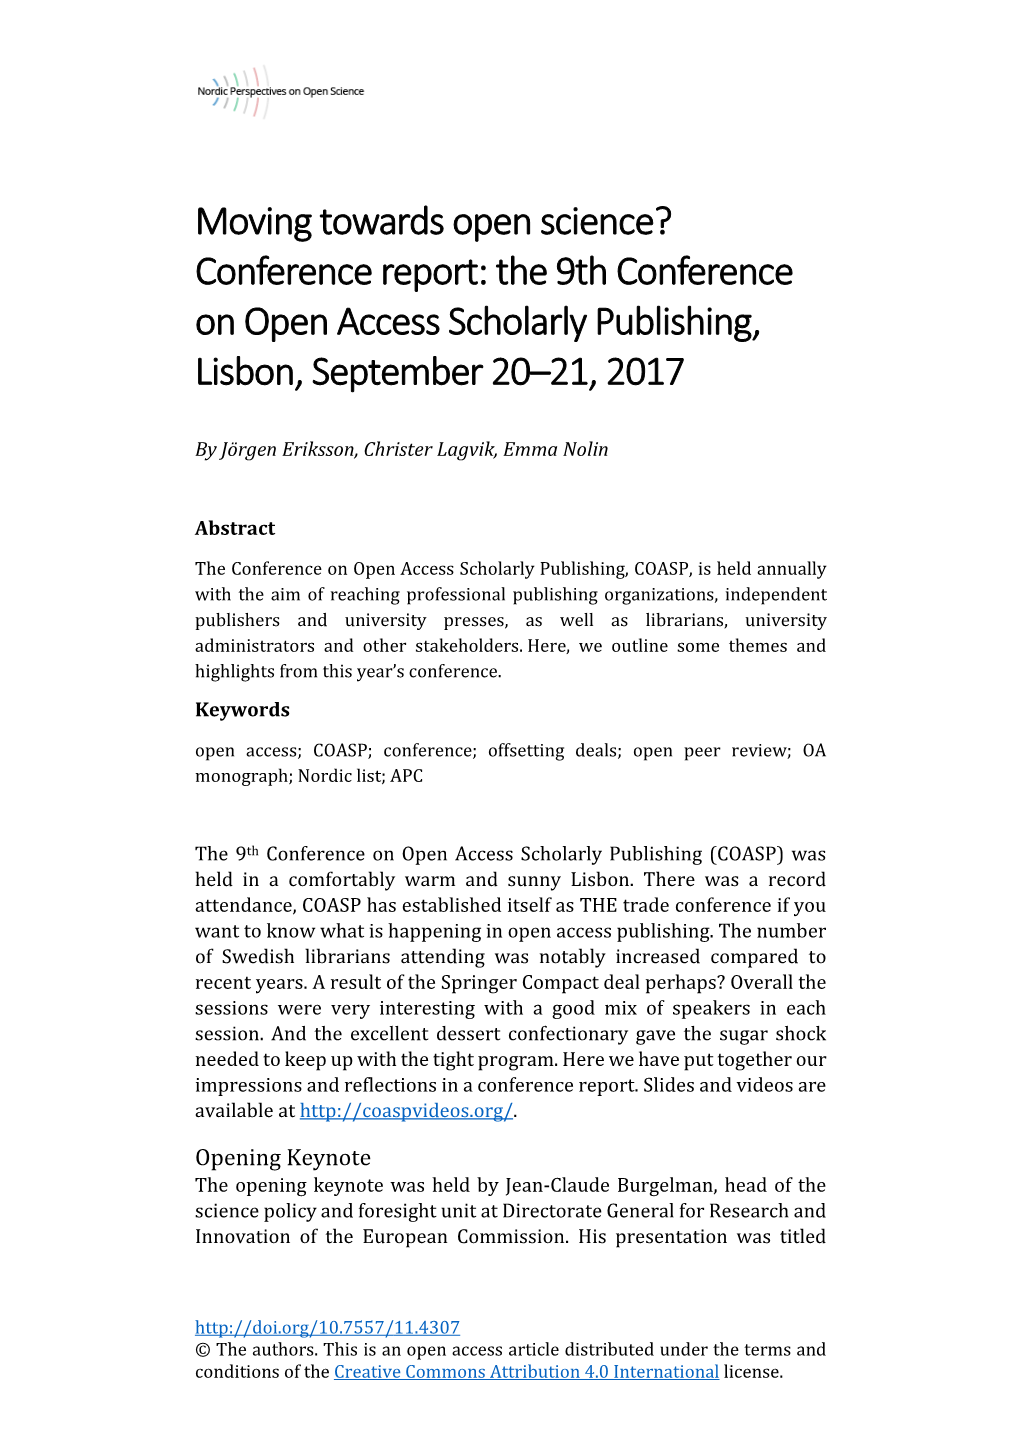 Moving Towards Open Science? Conference Report: the 9Th Conference on Open Access Scholarly Publishing, Lisbon, September 20–21, 2017